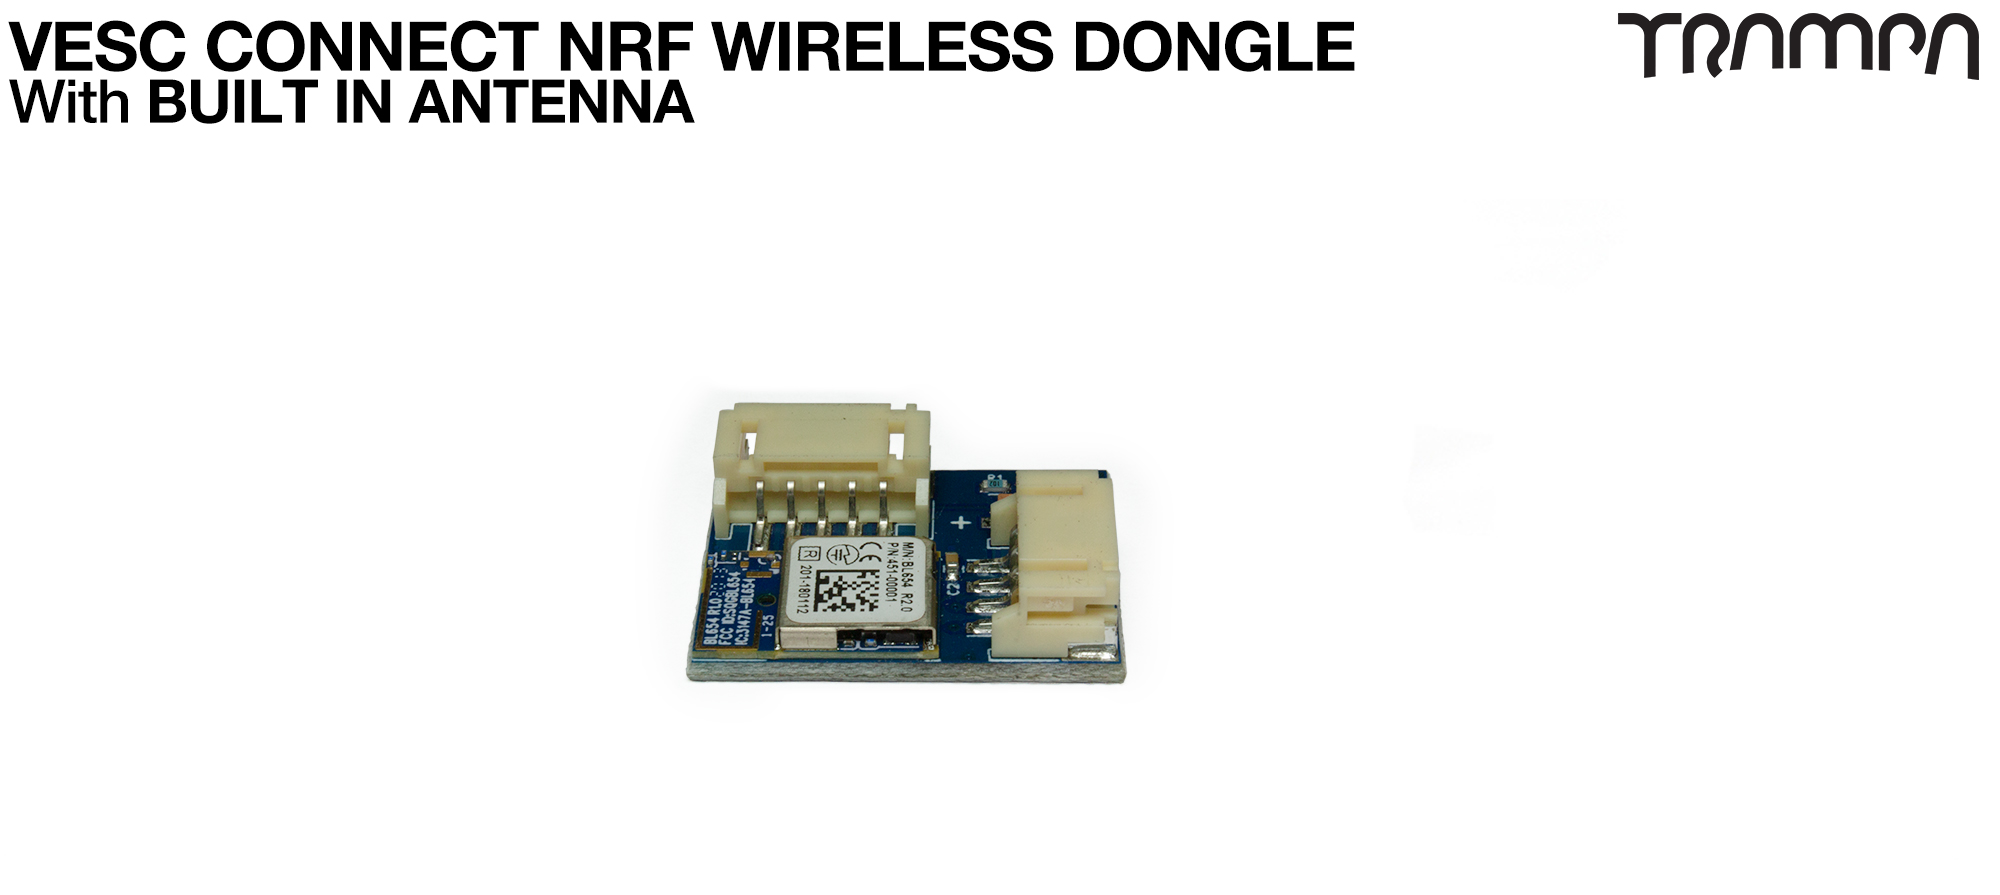 VESC Connect NRF Wireless Dongle with INTEGRATED ANTENNA